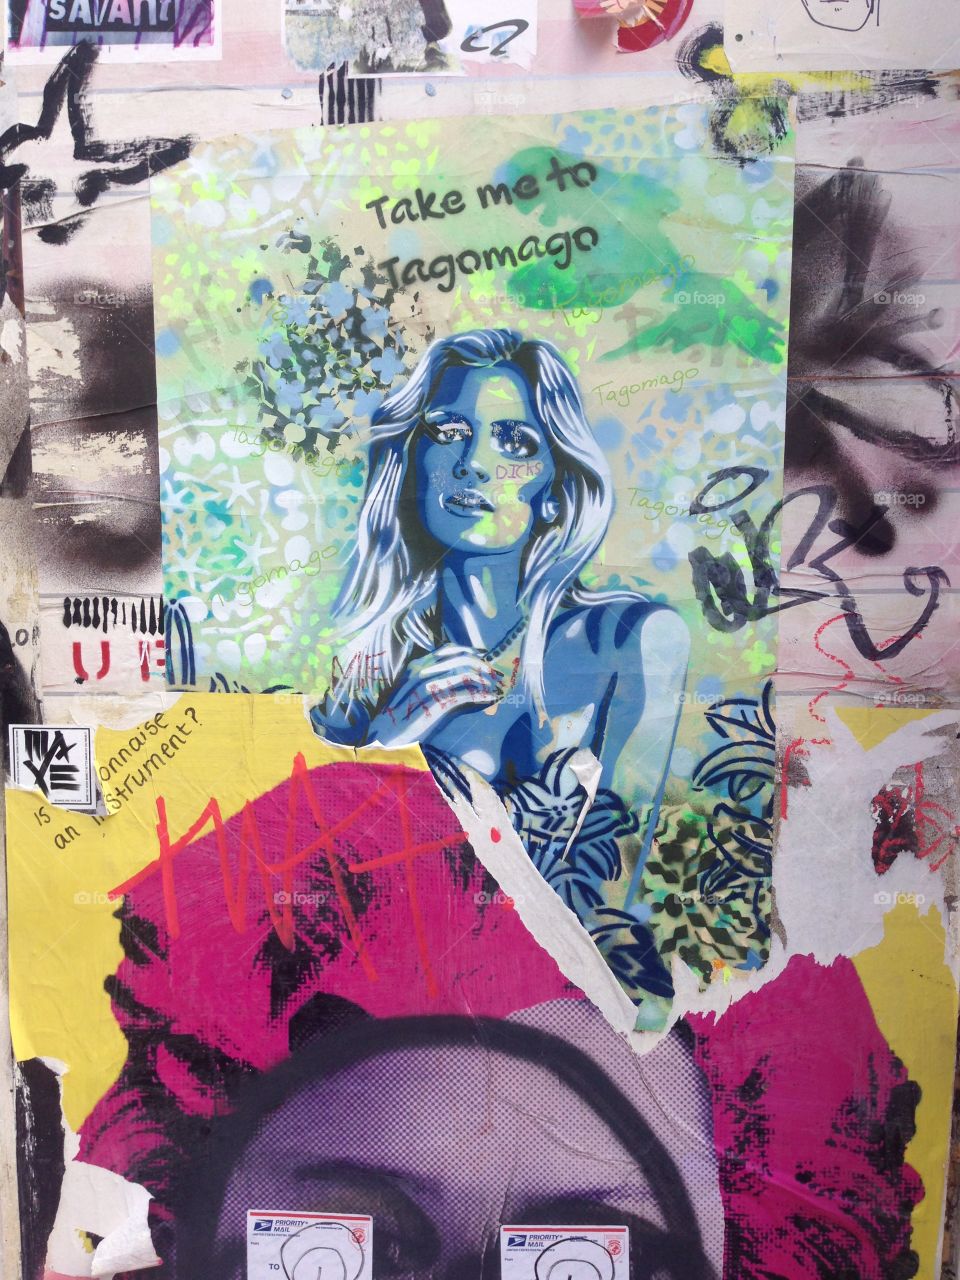 Take me with you. Graffiti spotted in Bricklane market, London